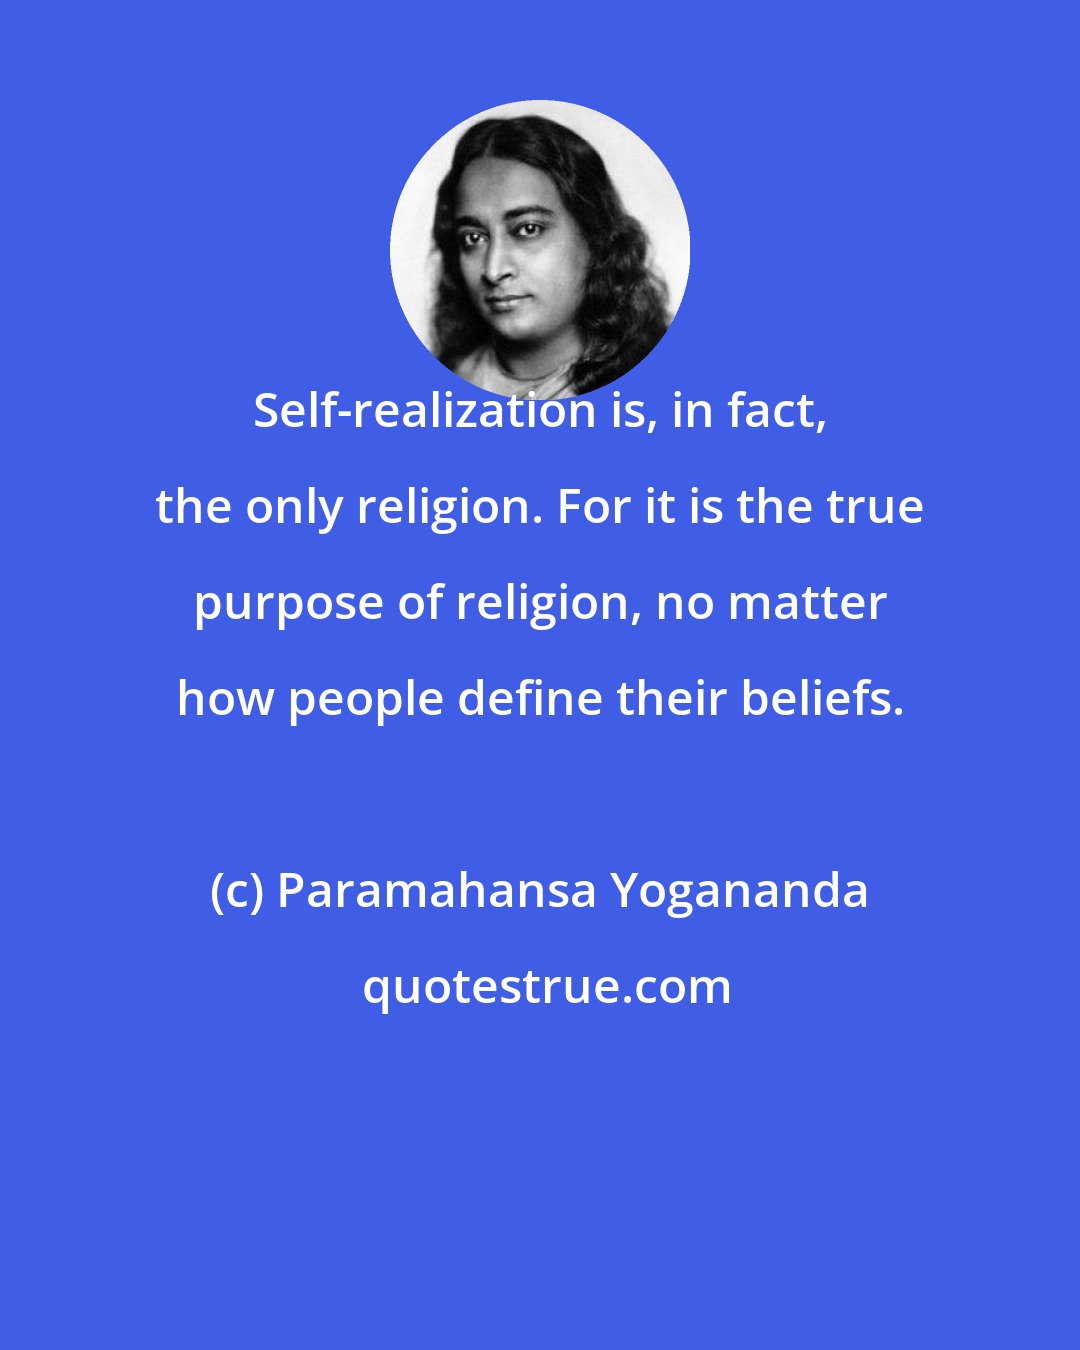 Paramahansa Yogananda: Self-realization is, in fact, the only religion. For it is the true purpose of religion, no matter how people define their beliefs.